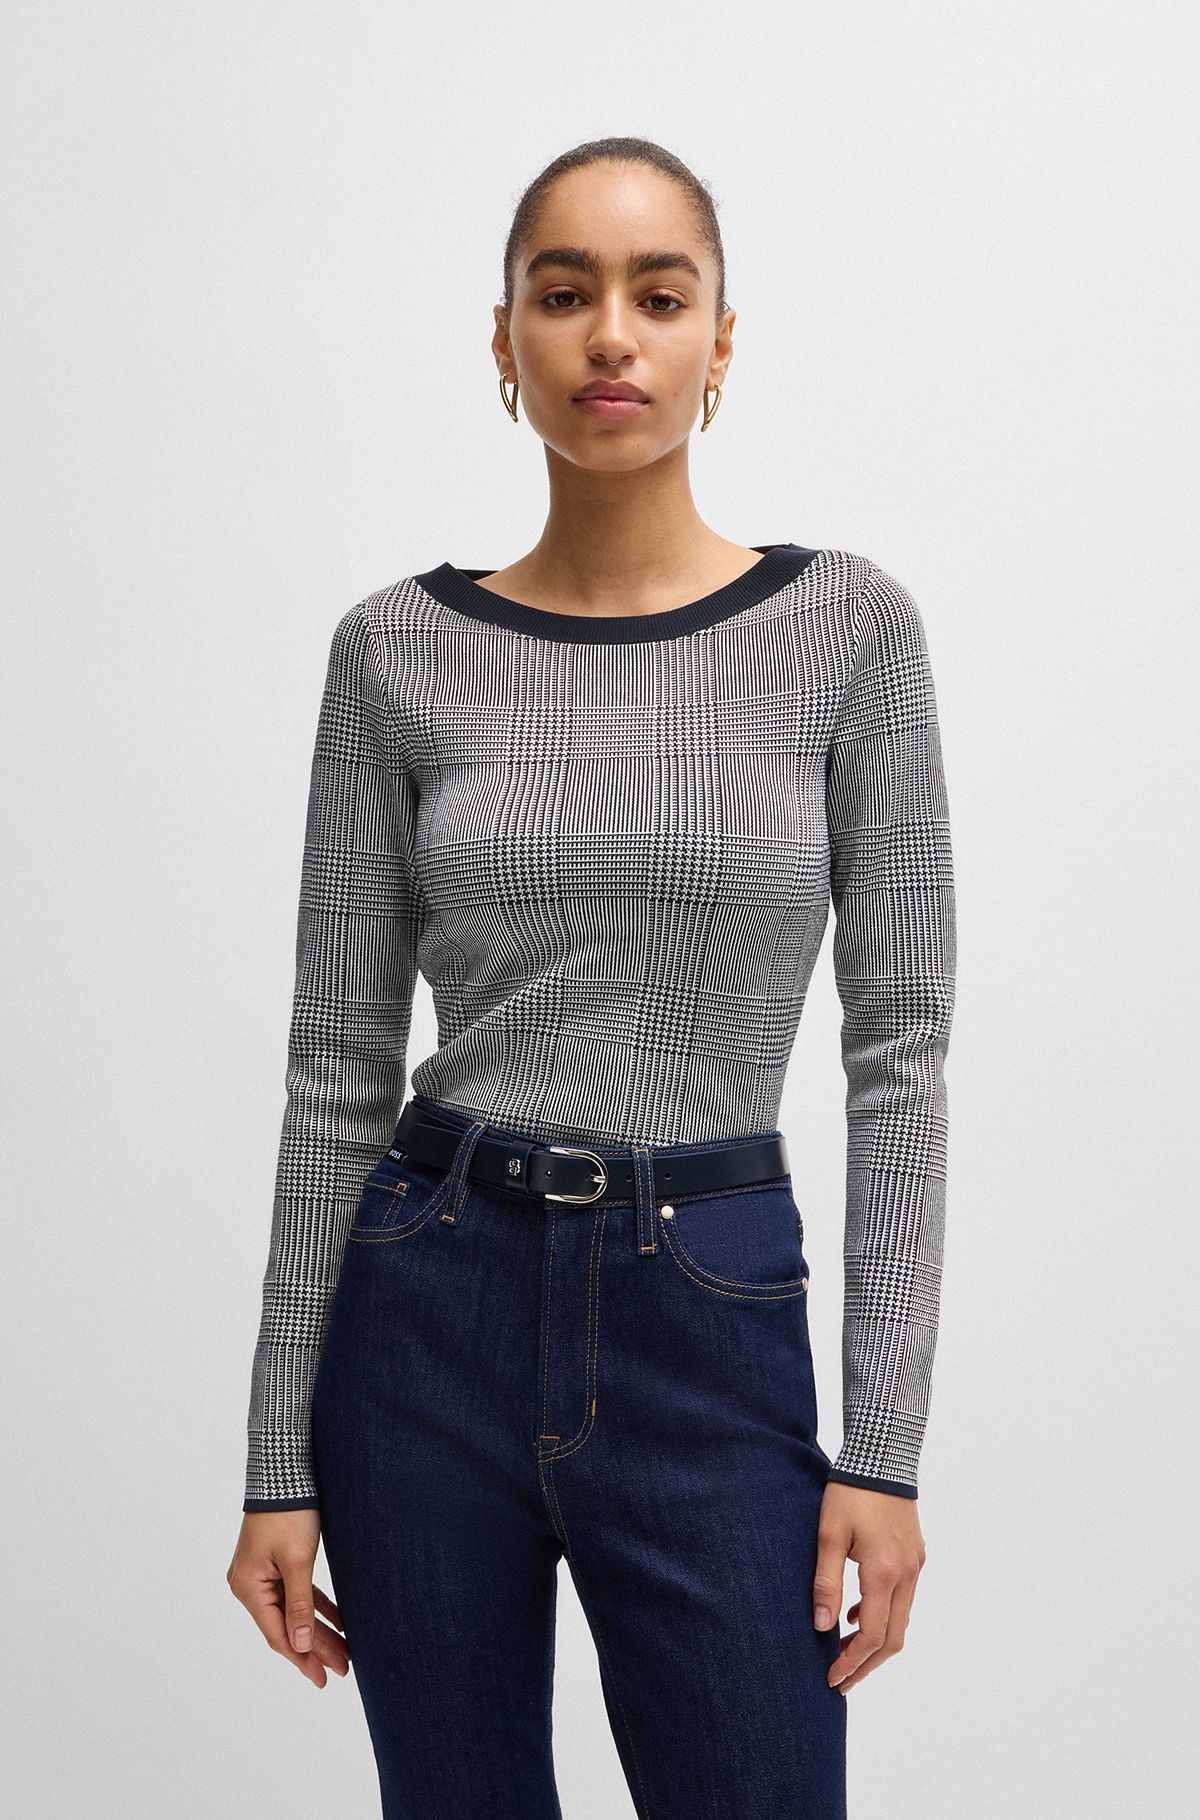 Wide-neck sweater in stretch jacquard, Grey Patterned